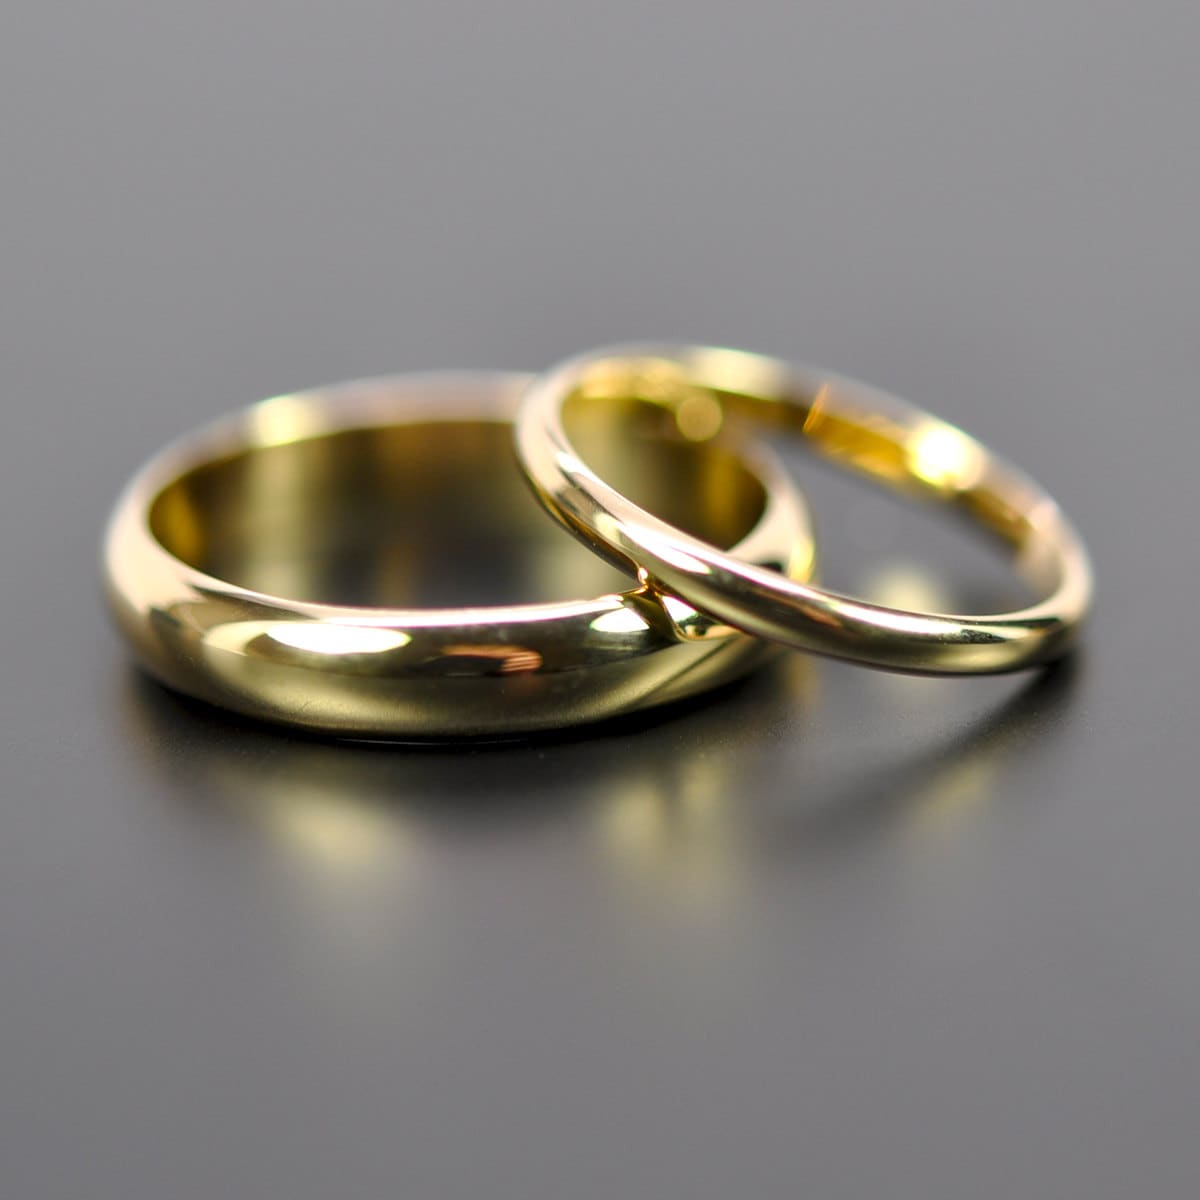 18K Yellow Gold Classic Wedding Band Set His and Hers Rings